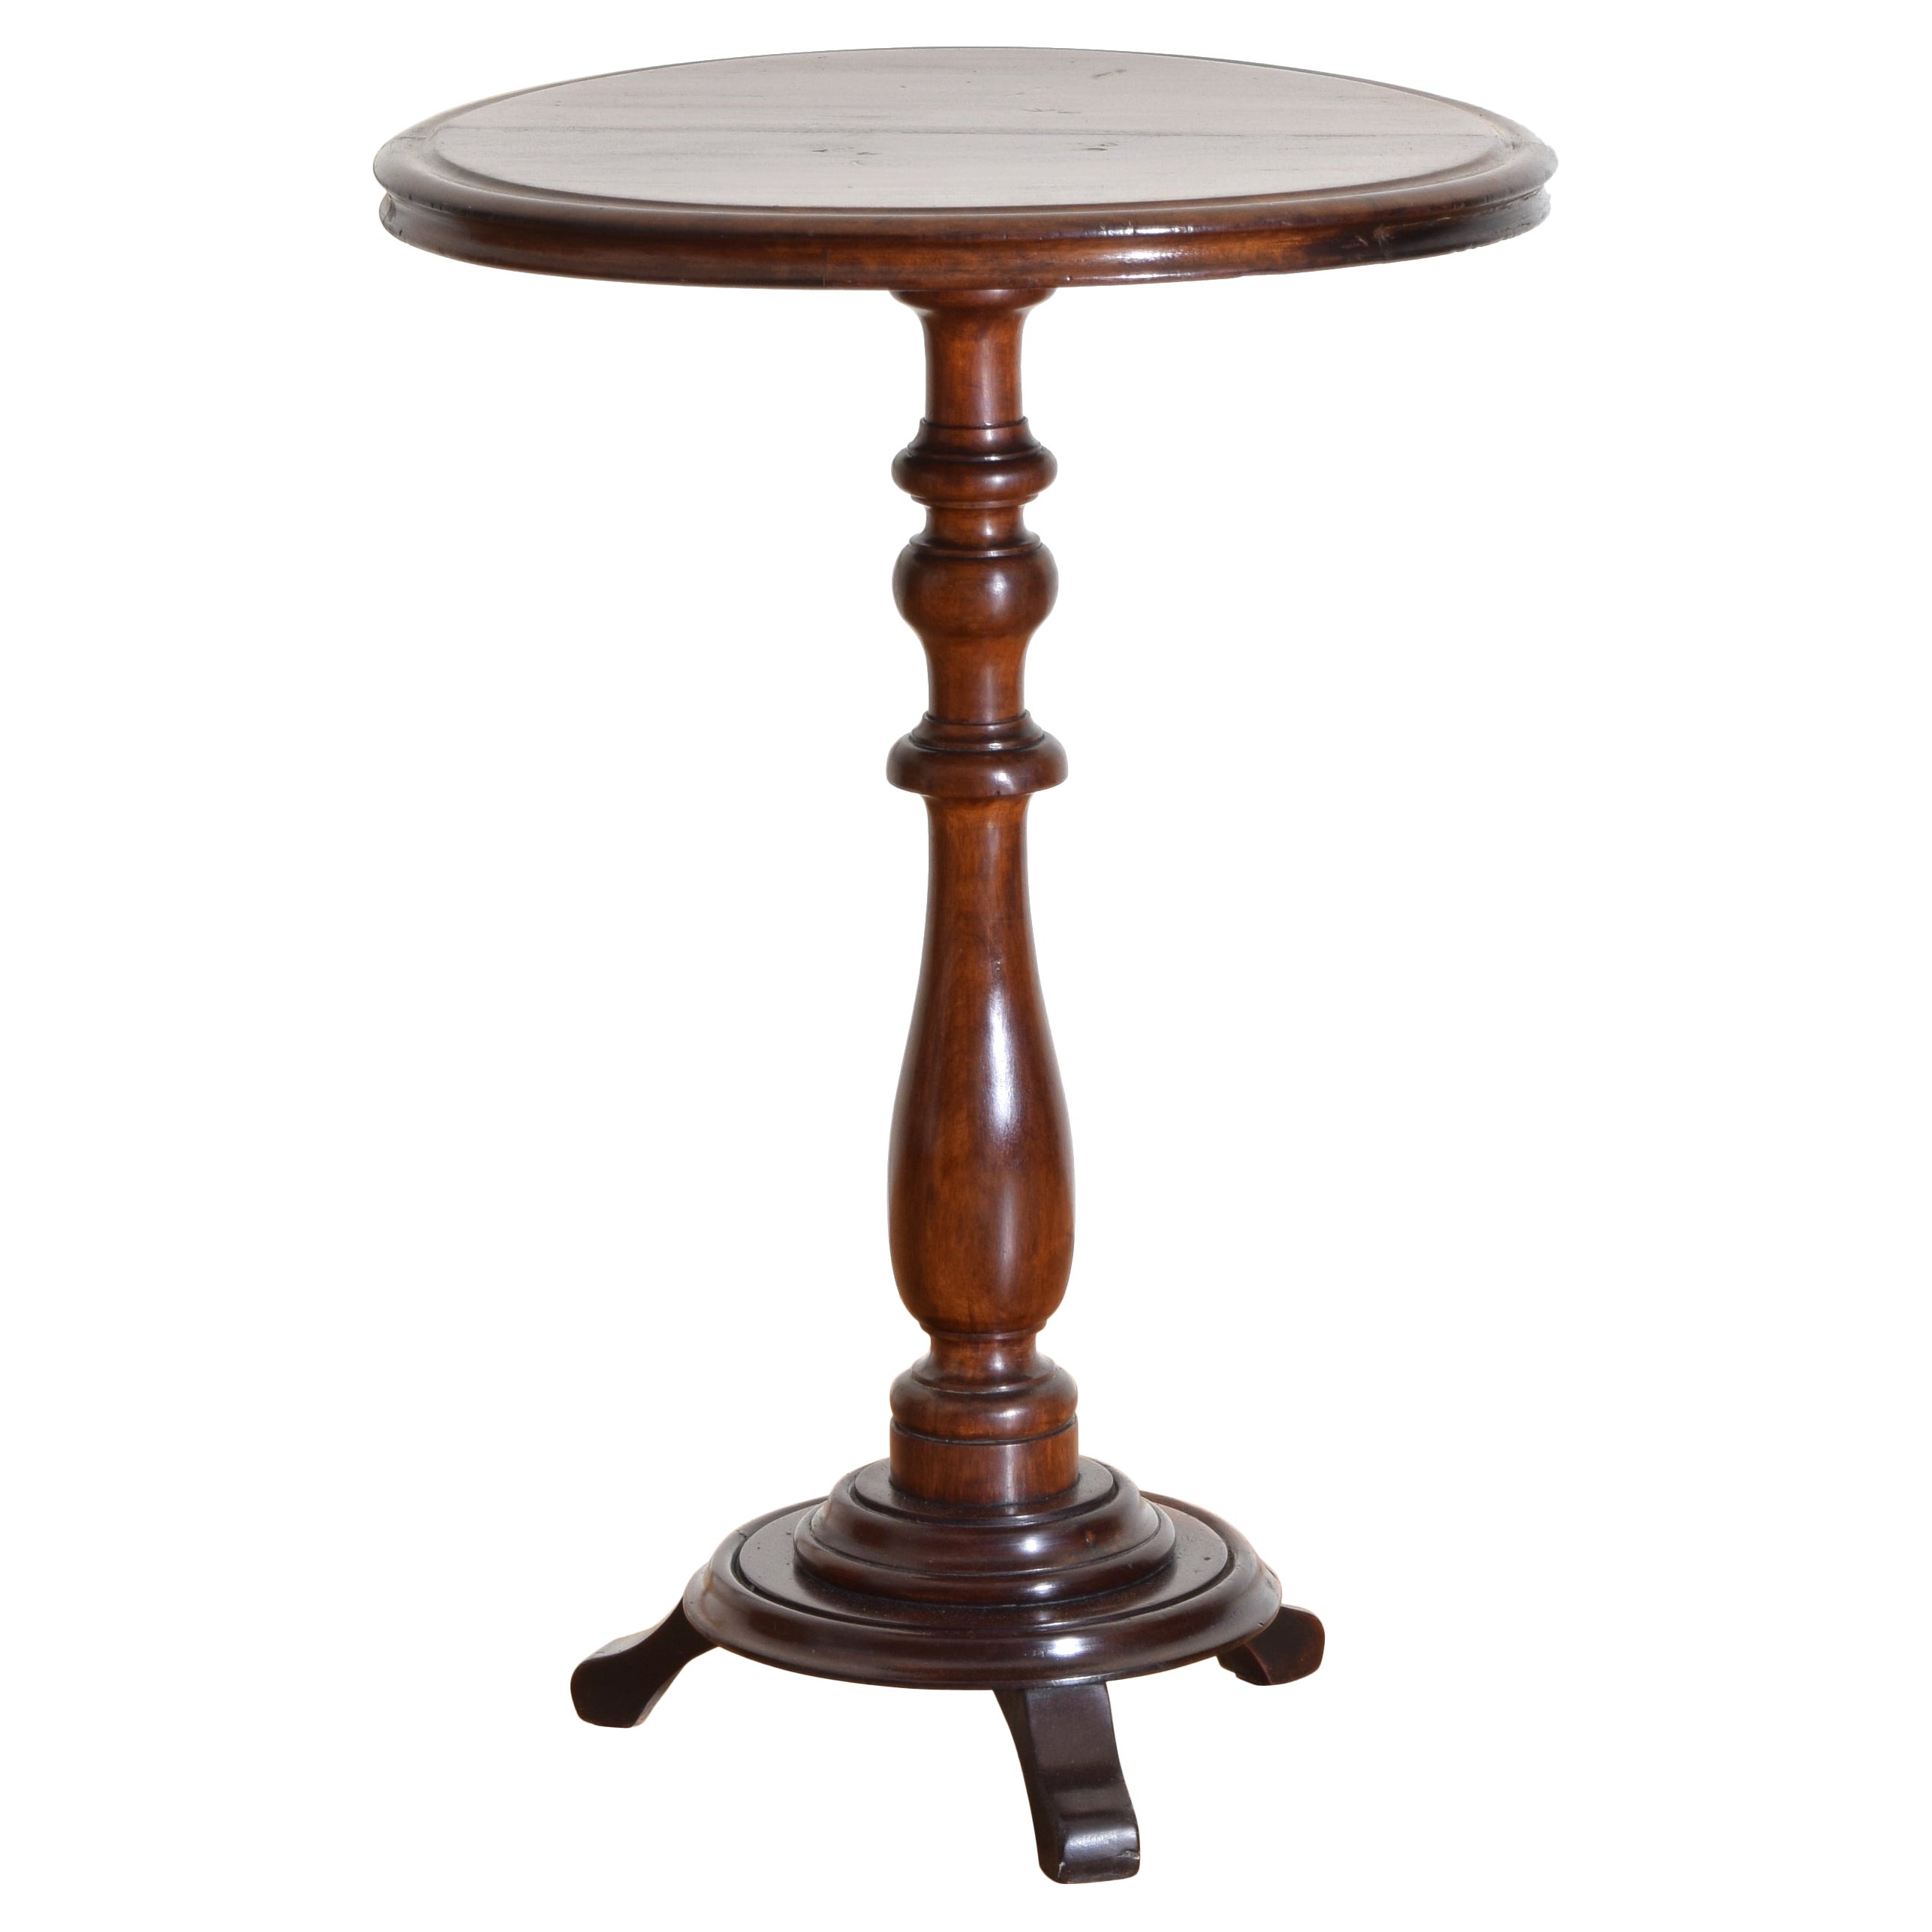 Italian Neoclassic Turned and Shaped Walnut Circular Table, ca. 1835 For Sale